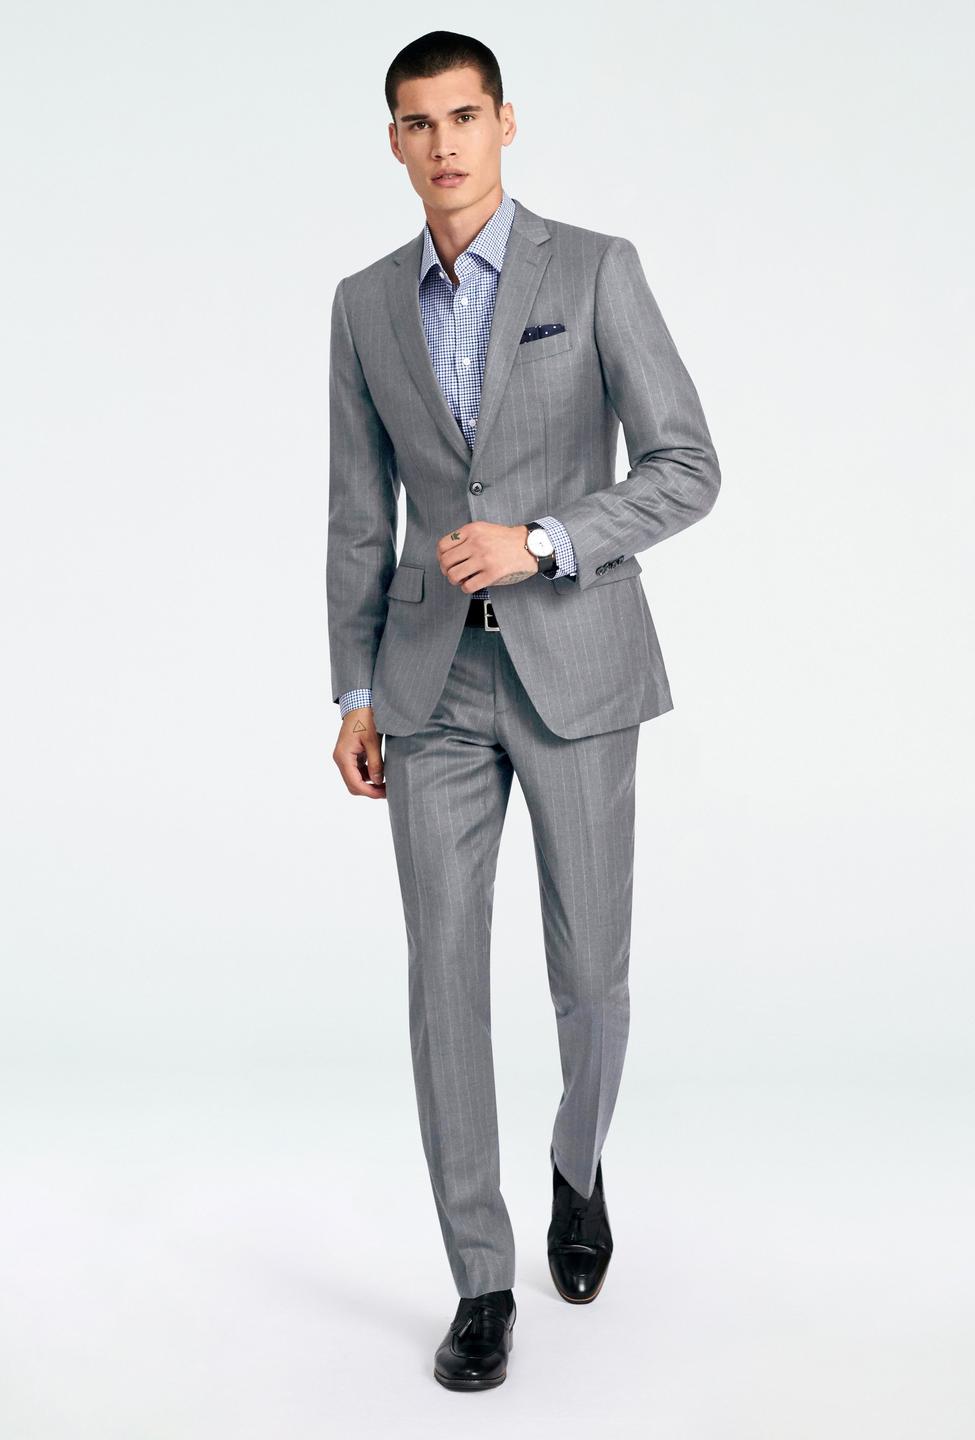 Gray suit - Reigate Striped Design from Seasonal Indochino Collection